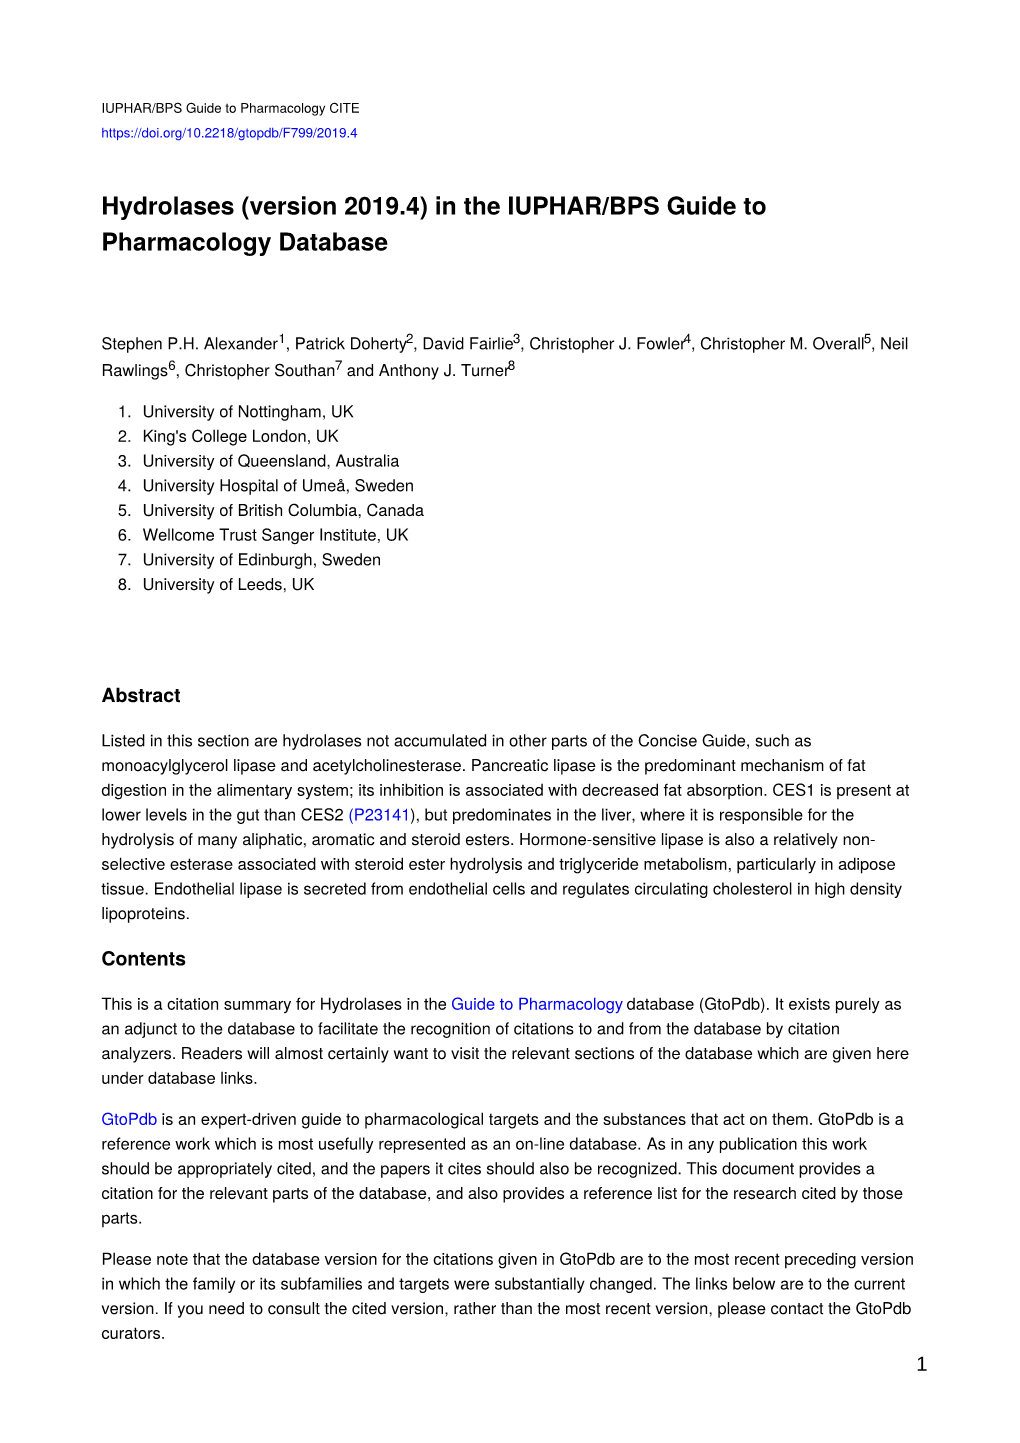 Hydrolases (Version 2019.4) in the IUPHAR/BPS Guide to Pharmacology Database